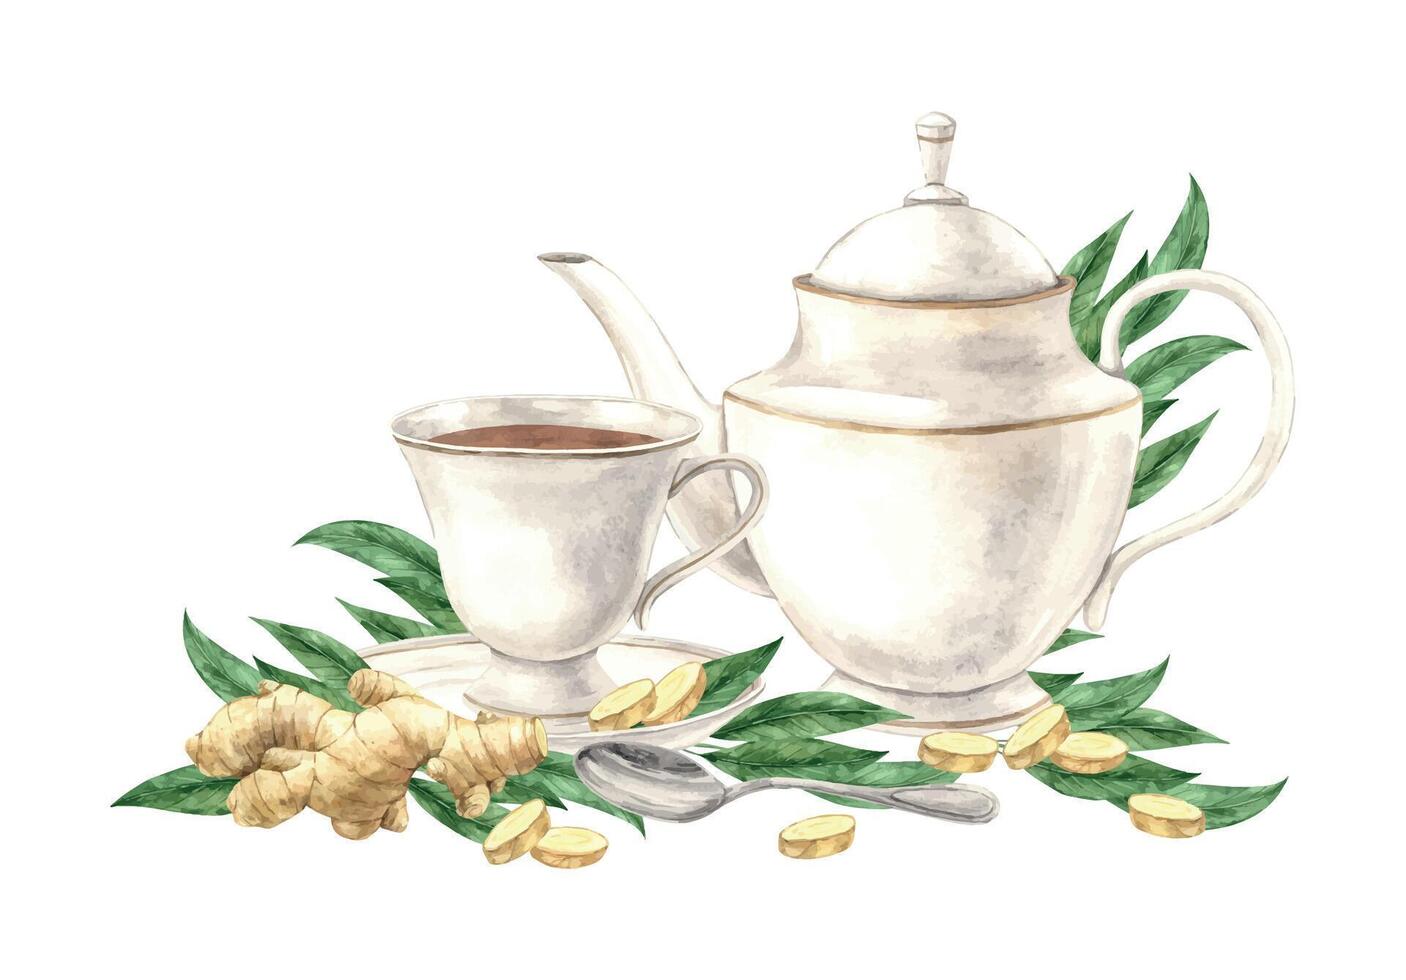 Watercolor composition with a teapot and a mug of tea, a silver spoon, ginger and sugar. Hand drawn illustration, suitable for menu design, packaging, poster, website, textile, invitation, brochure vector